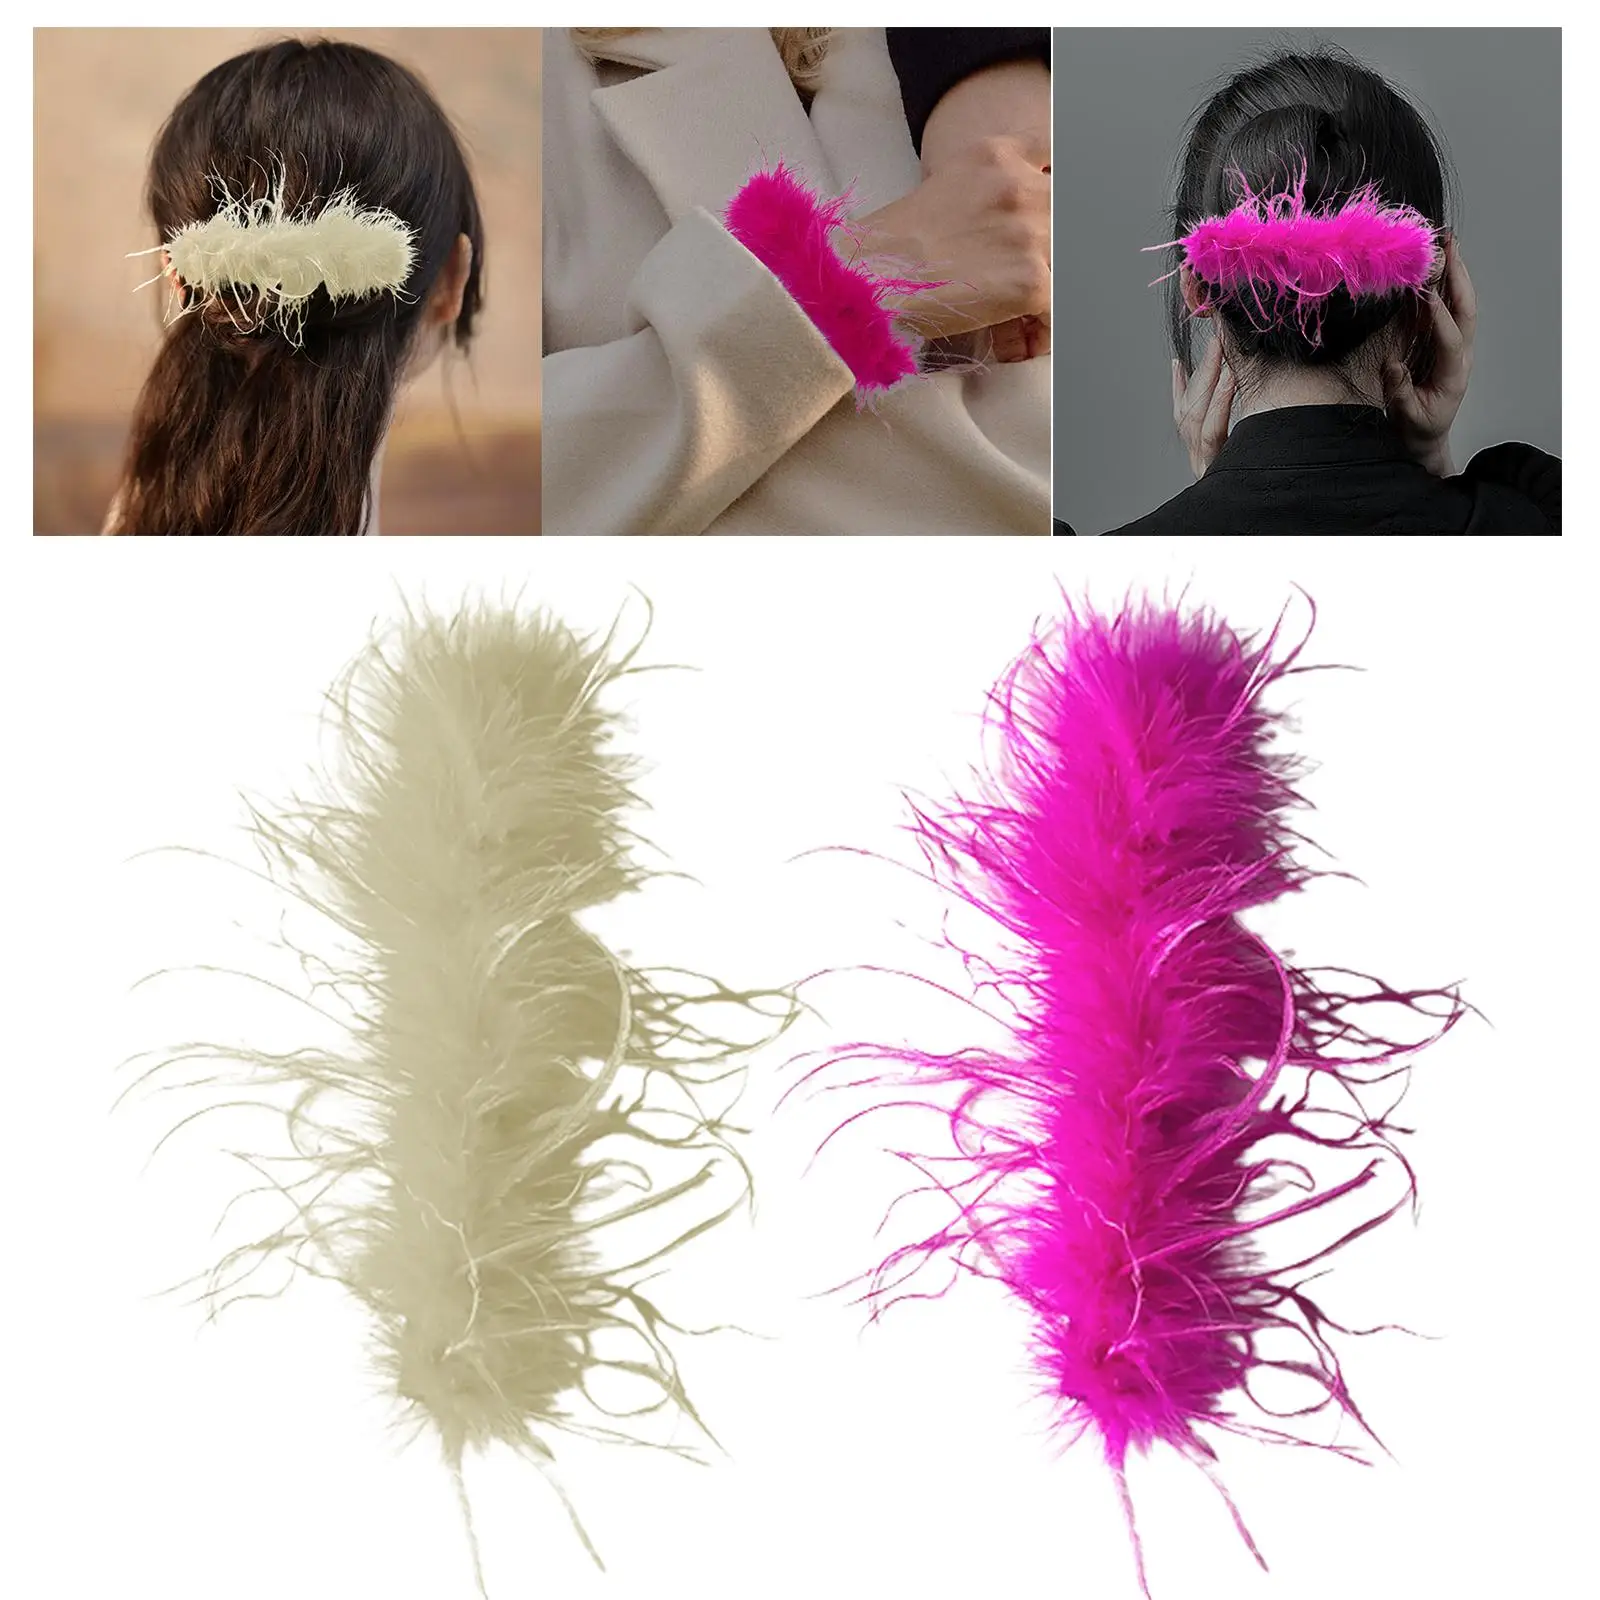 Feather Slap Bracelets Cuffs Bracelet Decoration Wrist Sleeve Patting Wristband Hair Band for Party New Year Kids Teens Adult